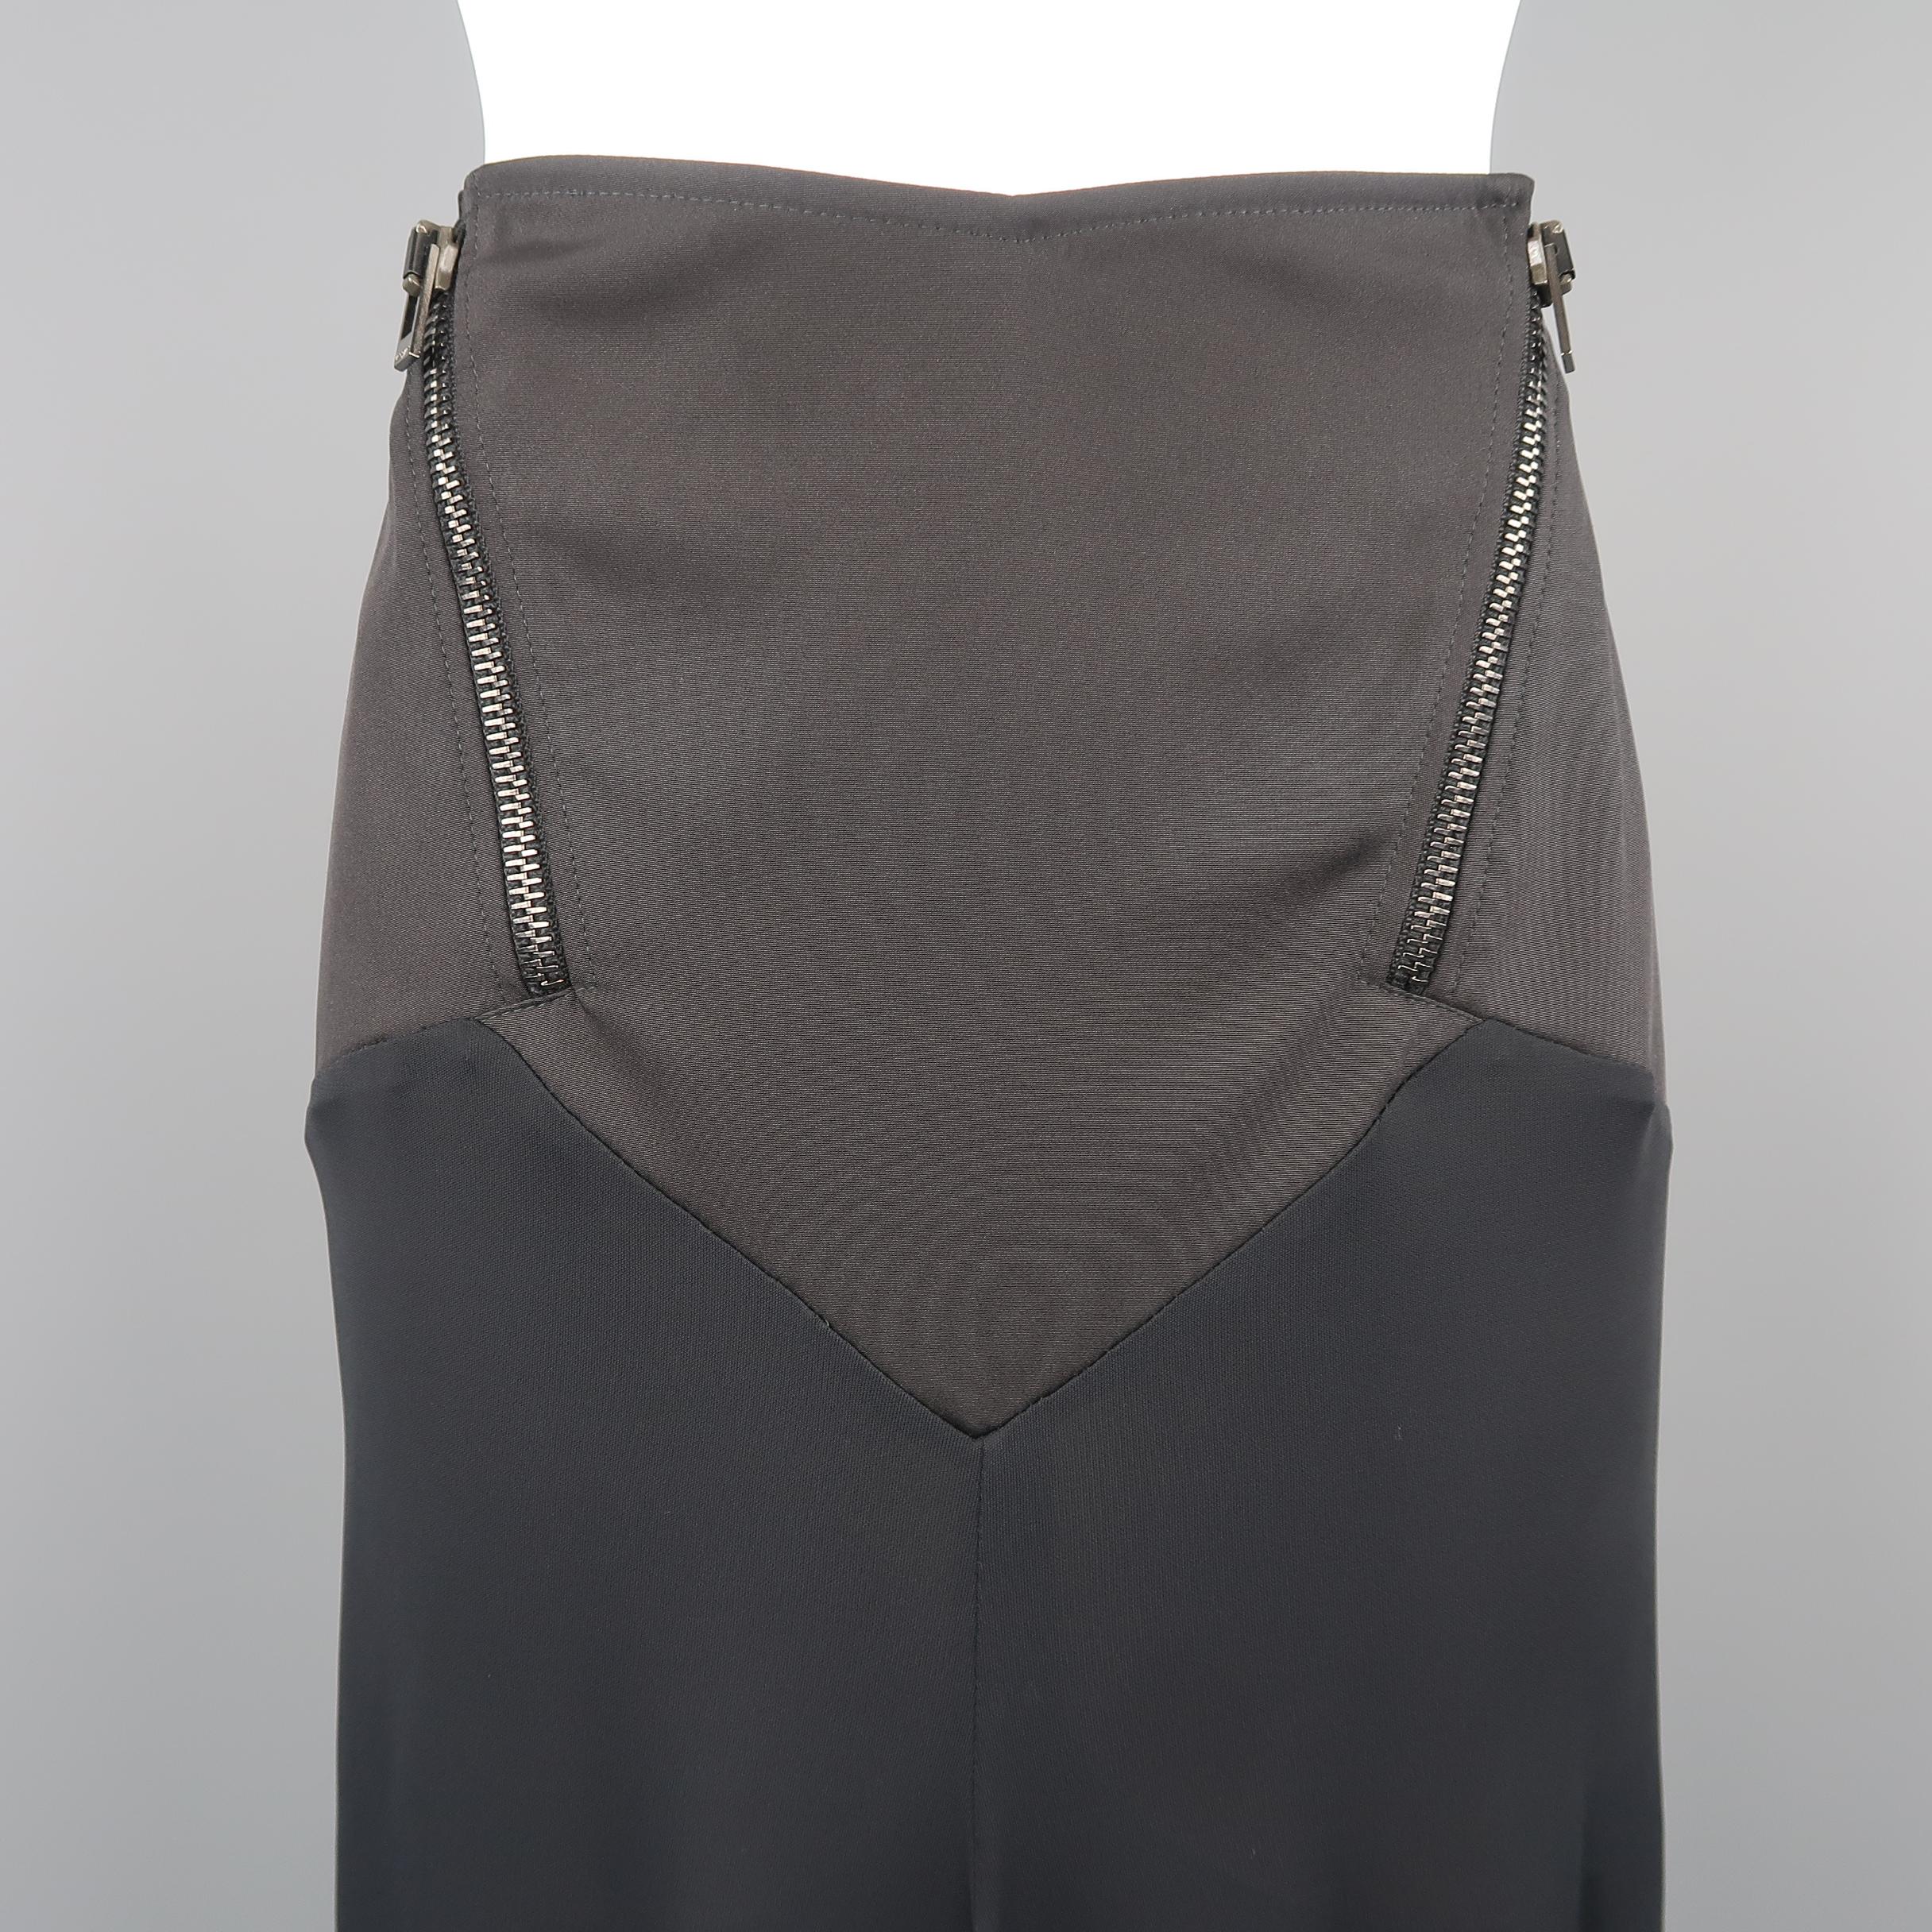 VERSACE skirt features a diagonal zip accented fitted top and layered flair silhouette ruffled hem bottom with slit. Made in Italy.
 
Excellent Pre-Owned Condition.
Marked: IT 44
 
Measurements:
 
Waist: 32 in.
Hip: 38 in.
Length: 23-28 in.